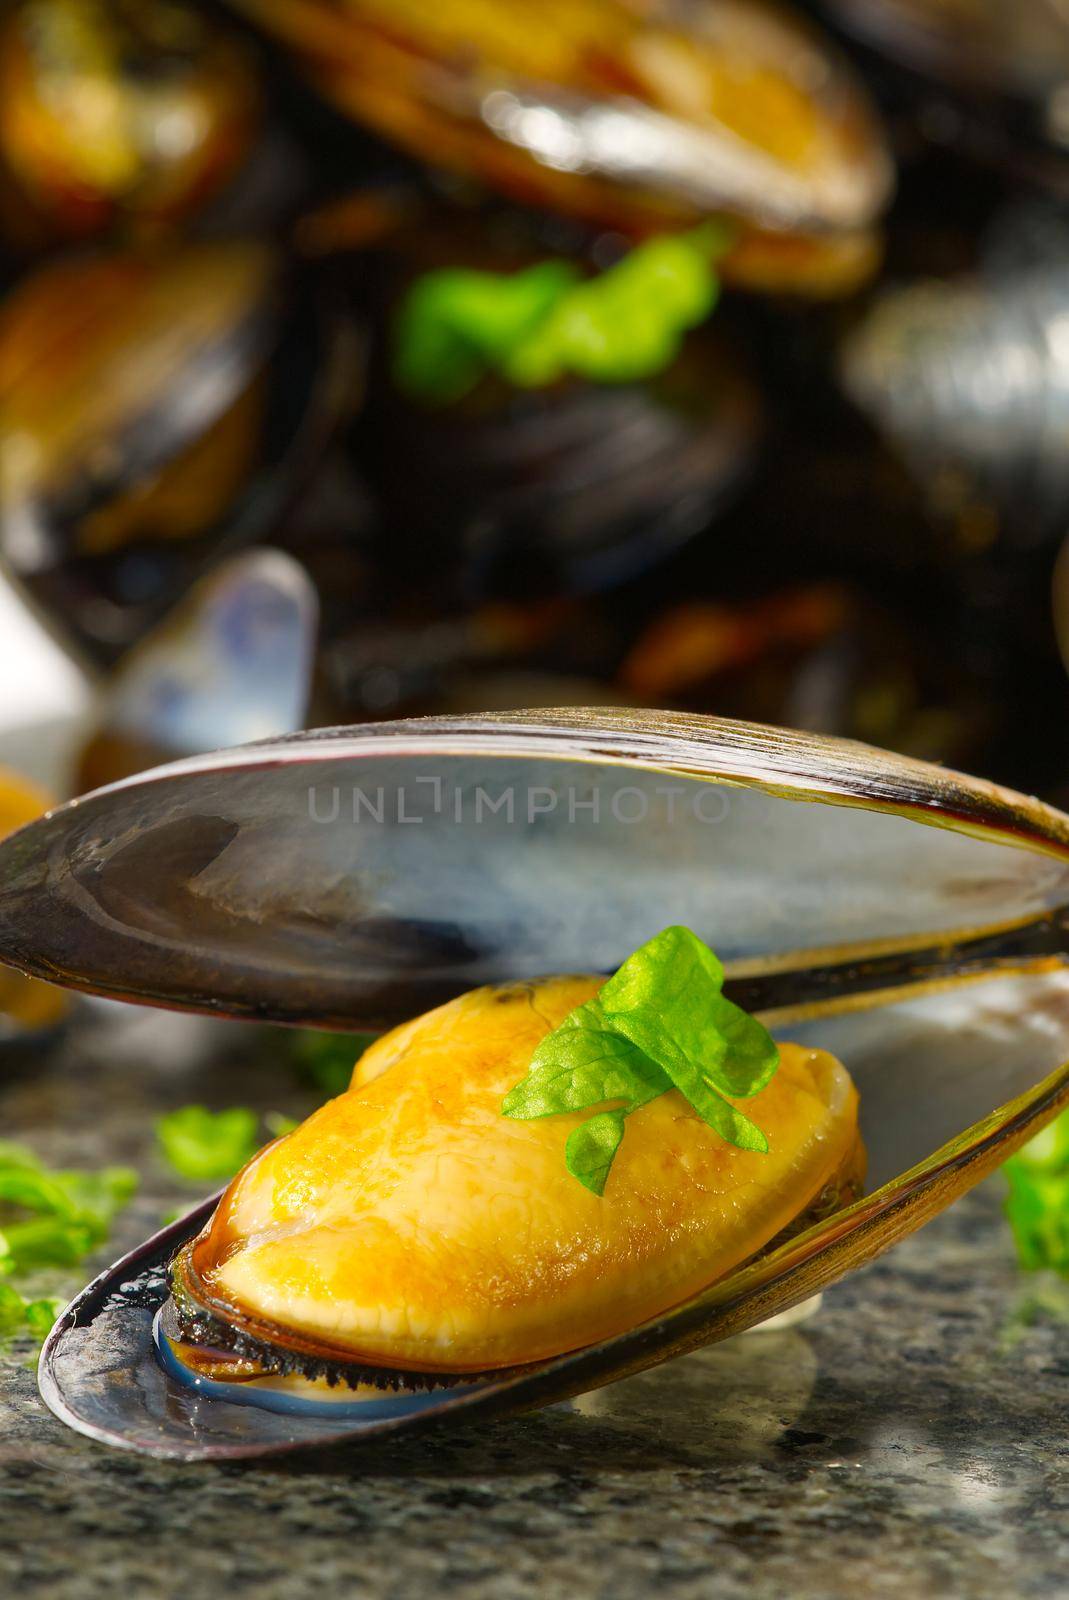 Cooked mussels with lemon and parsley on table. served mussels ready to eat. seafood